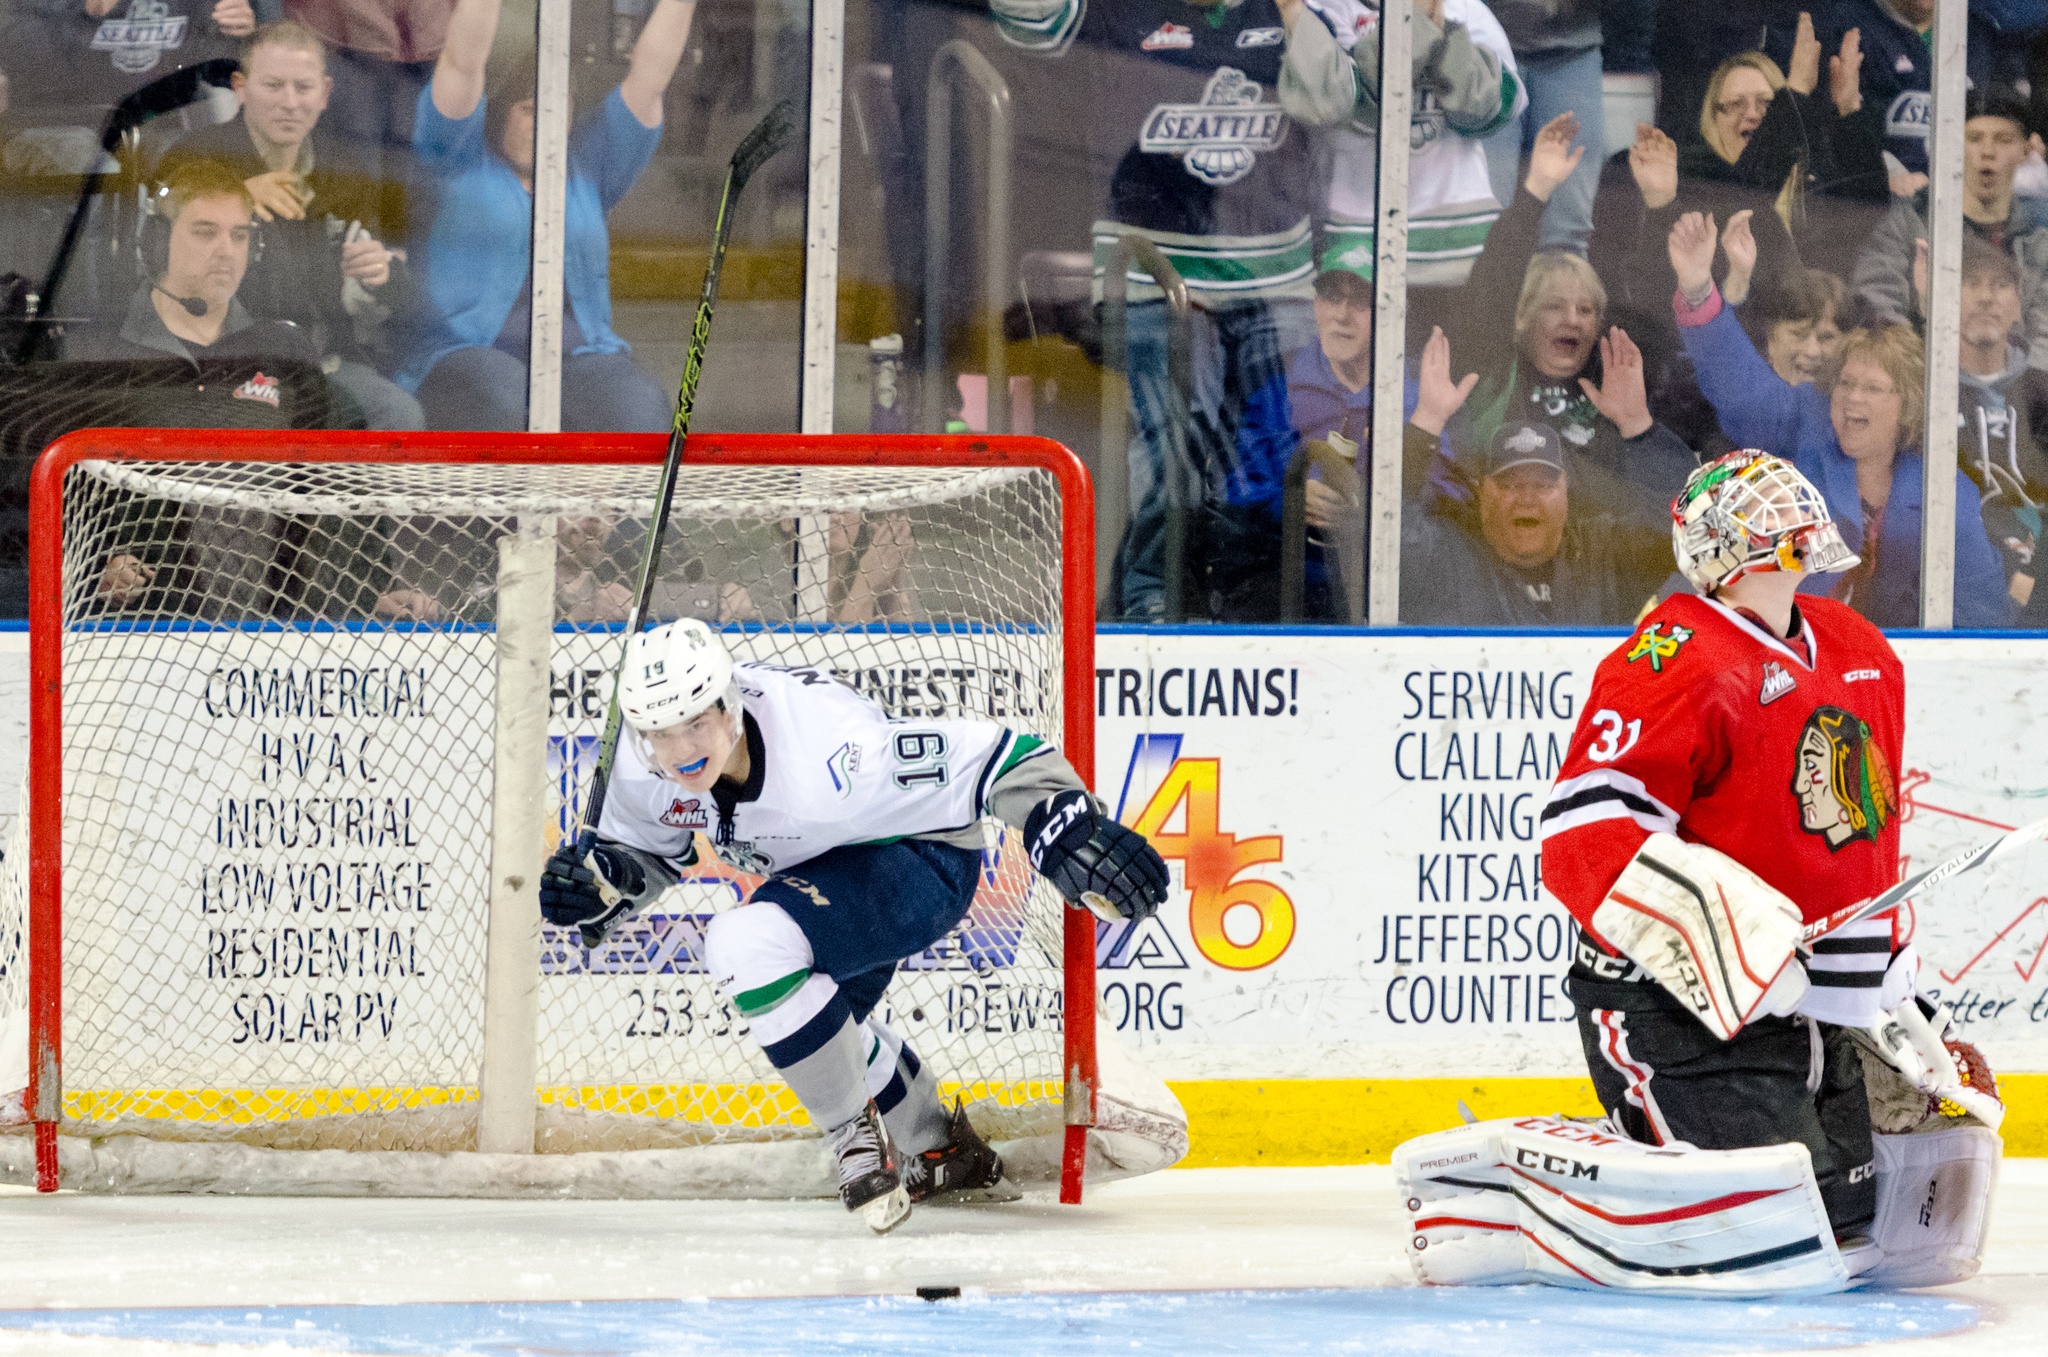 The Thunderbirds’ Donovan Neuls scores on Winterhawks goalie Cole Kehler during WHL action on March 19. Seattle came back from a three-goal deficit in front of a sellout crowd of 6